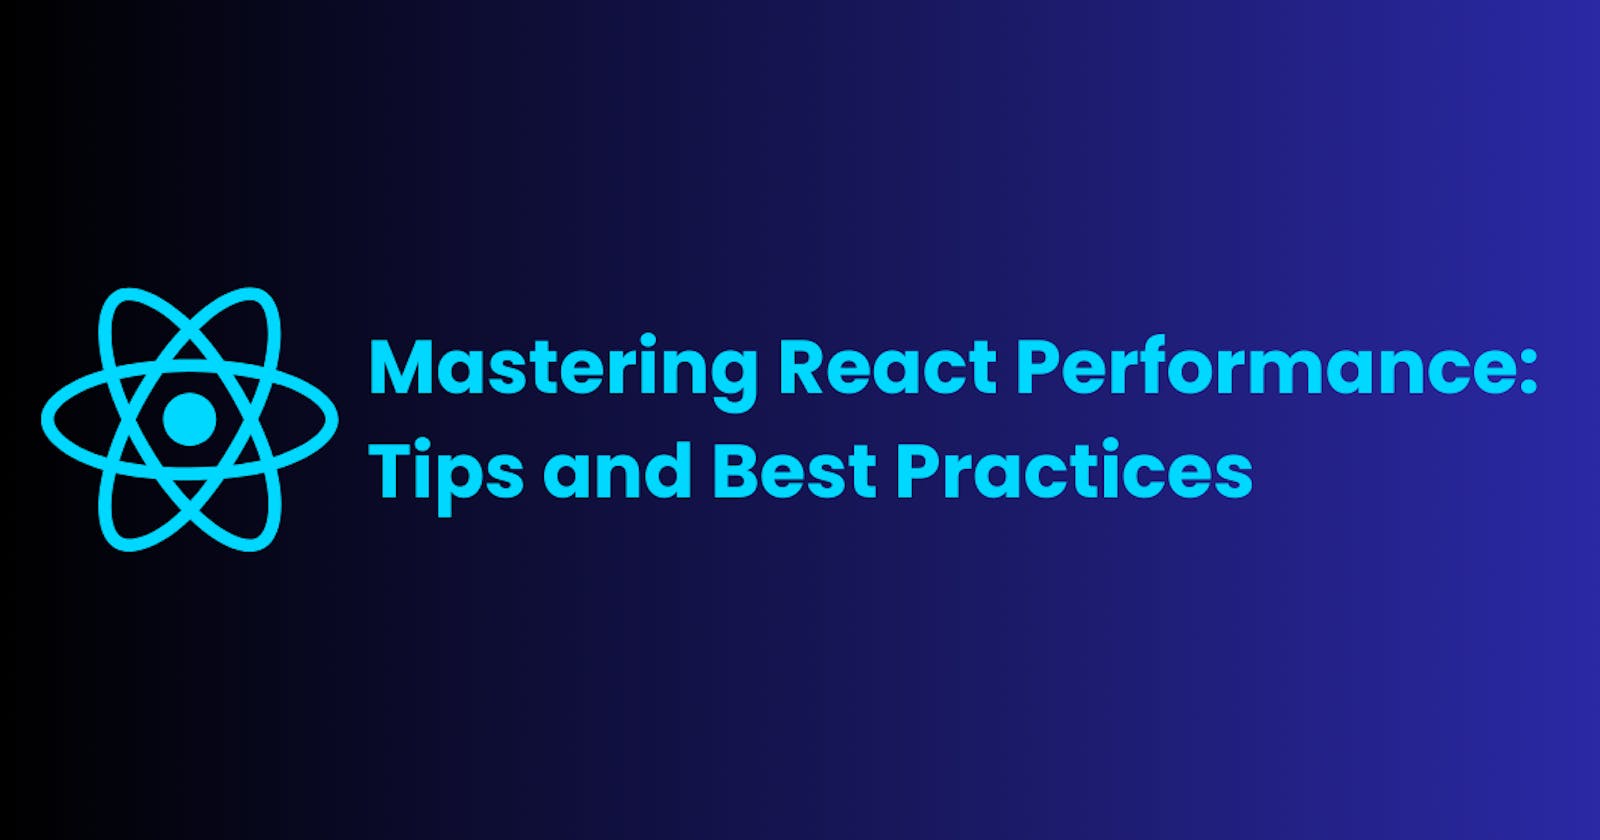 Mastering React Performance: Tips and Best Practices